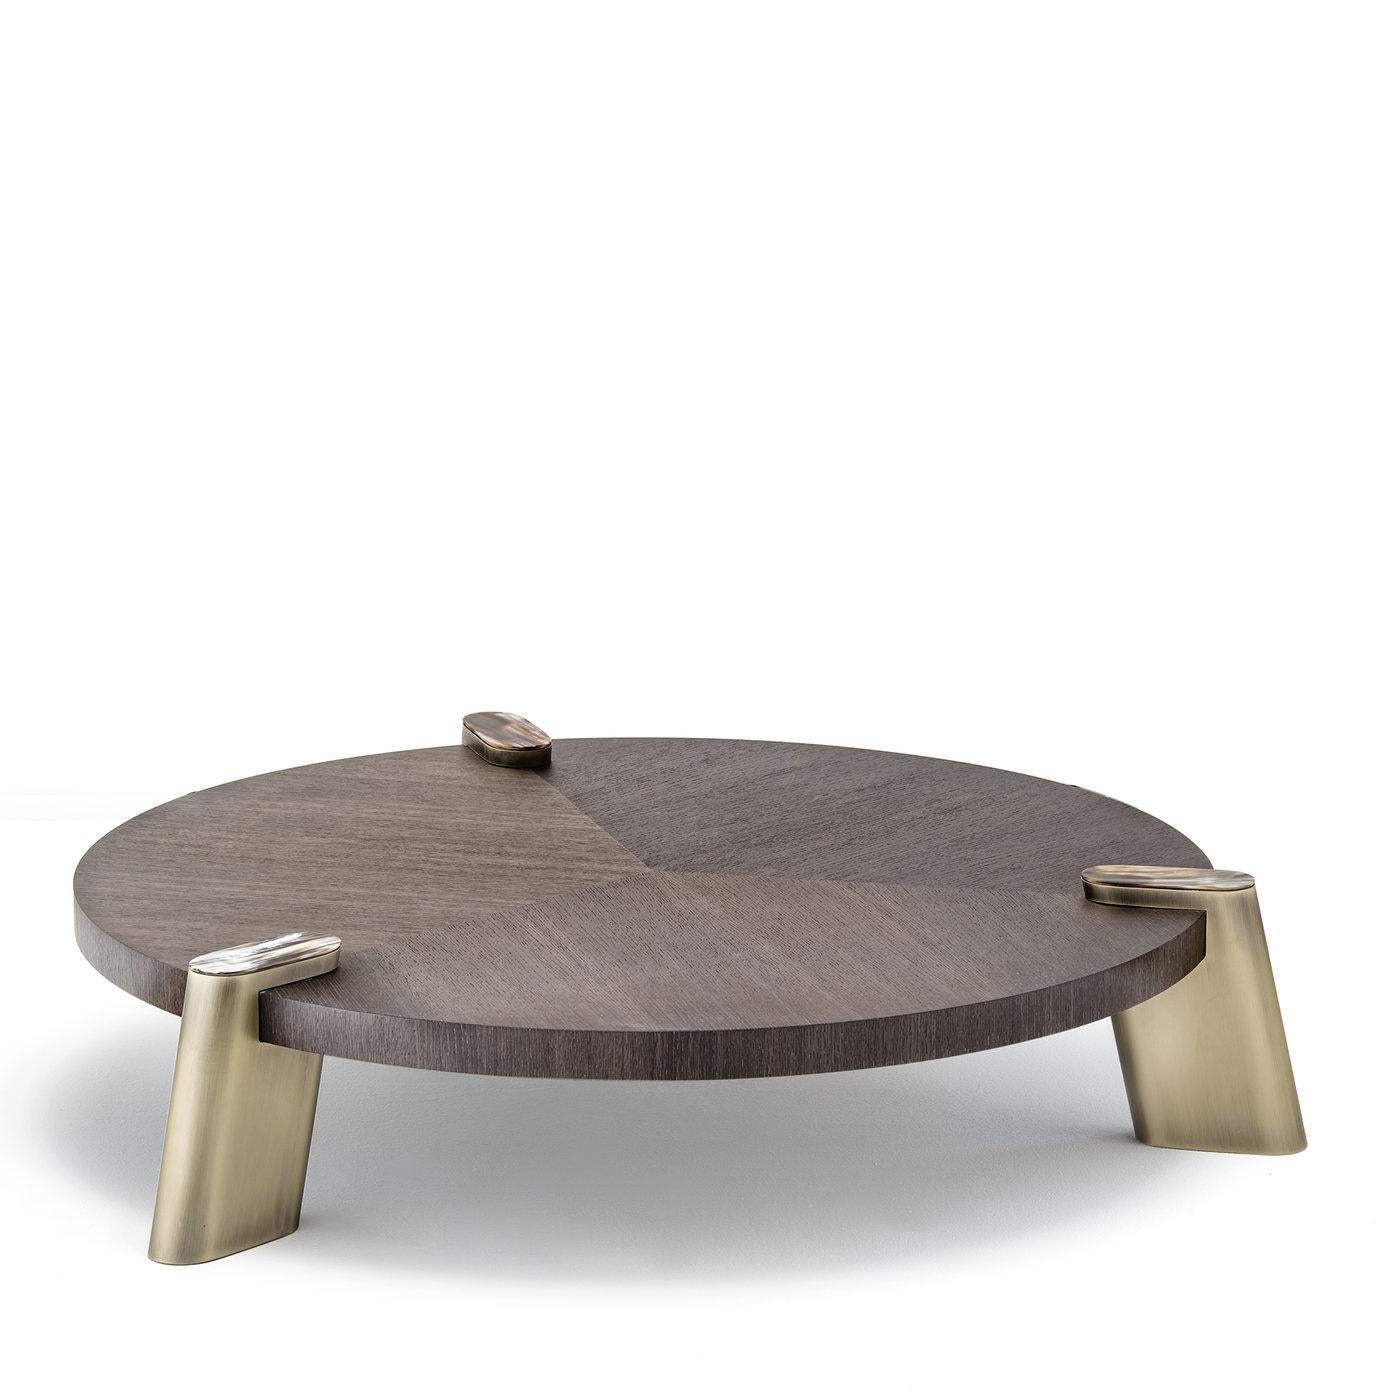 Defined by simple geometric lines, the striking elegance of these two coffee tables is all in the rich details. A stately round top in oak wood sits atop three slanted rectangular brass feet with rounded edges accented on top with natural horn. The